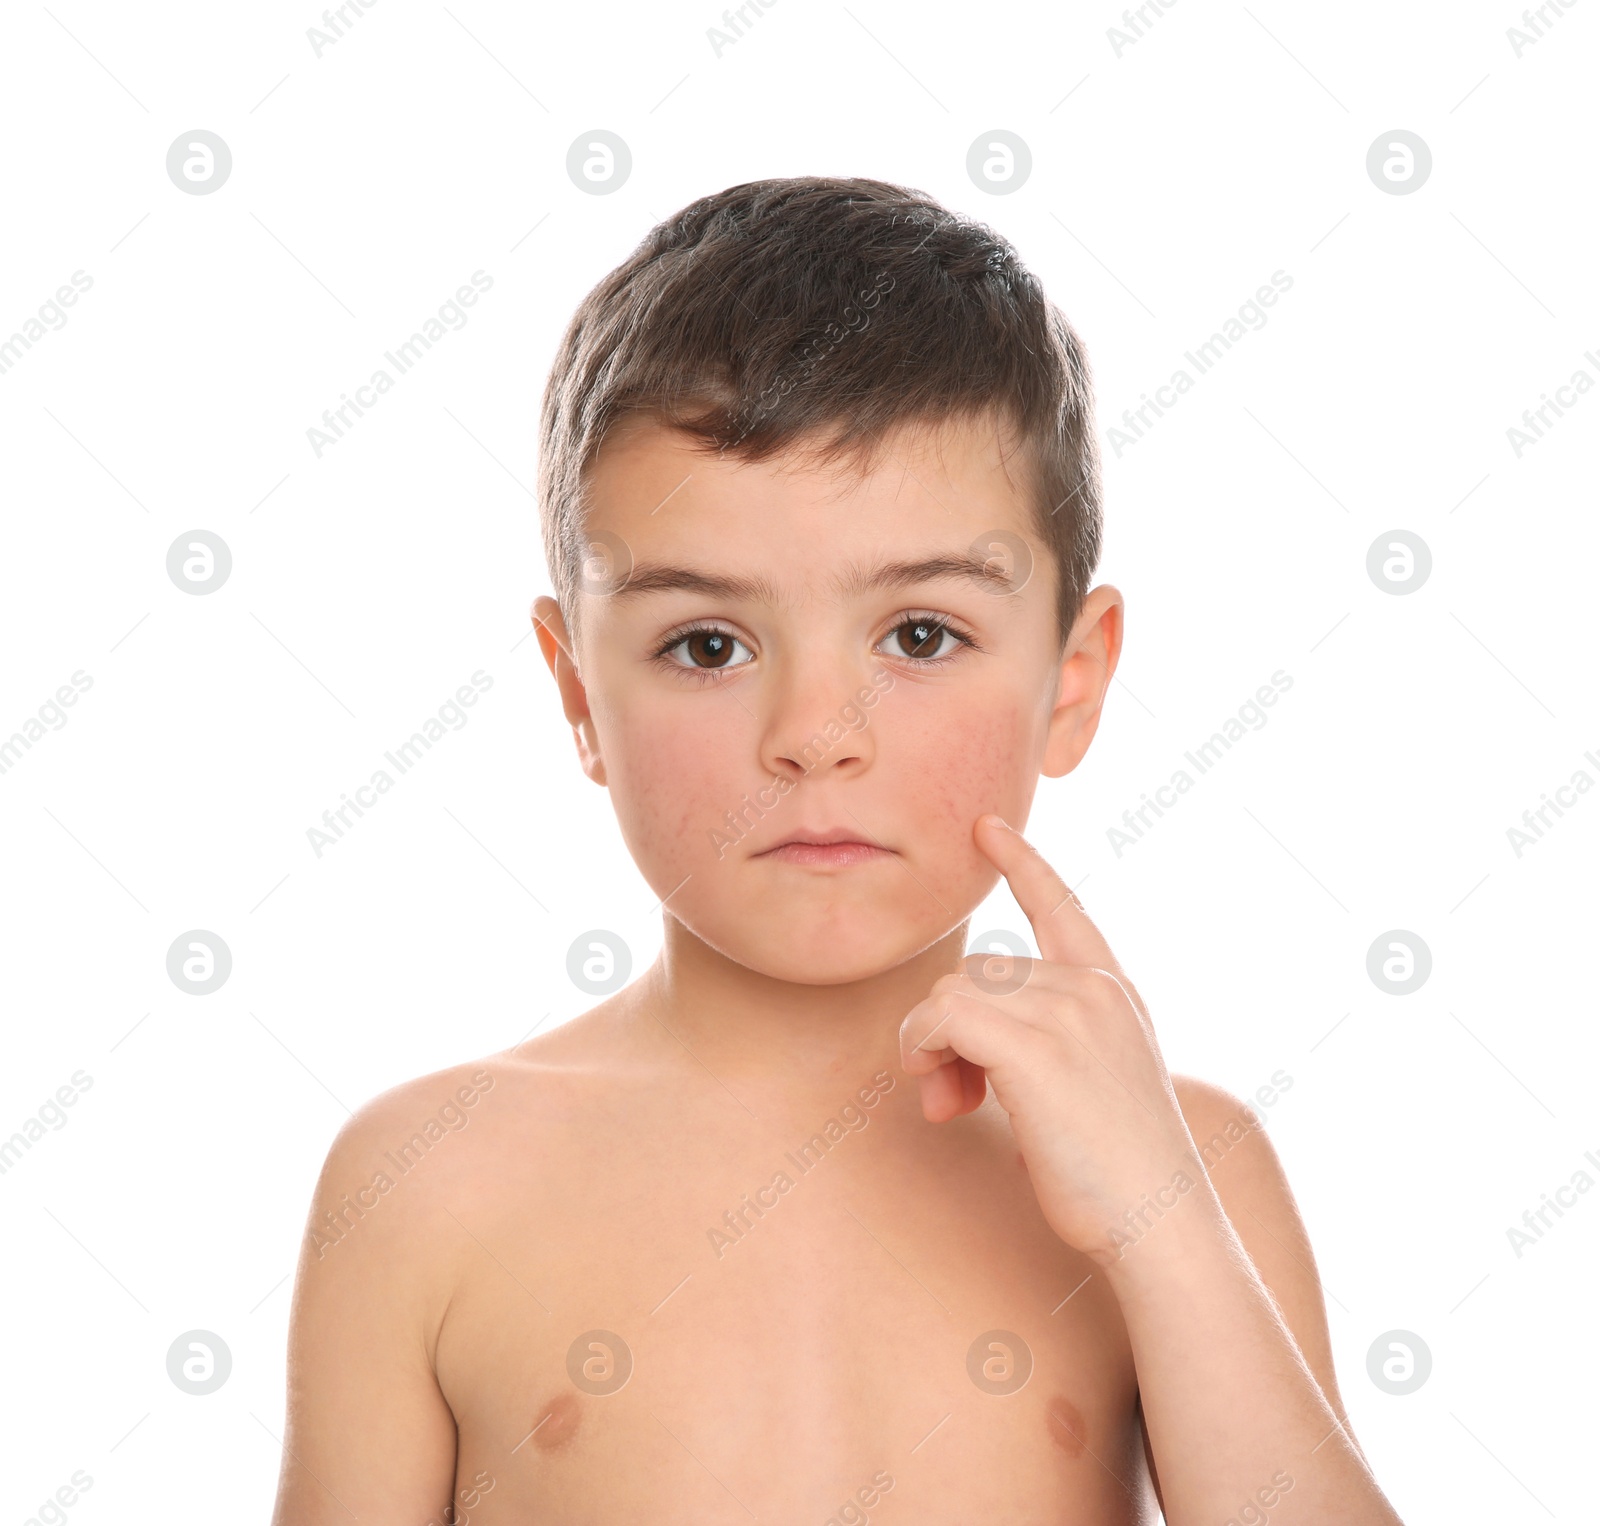 Image of Cute little boy with allergy symptoms on cheeks against white background